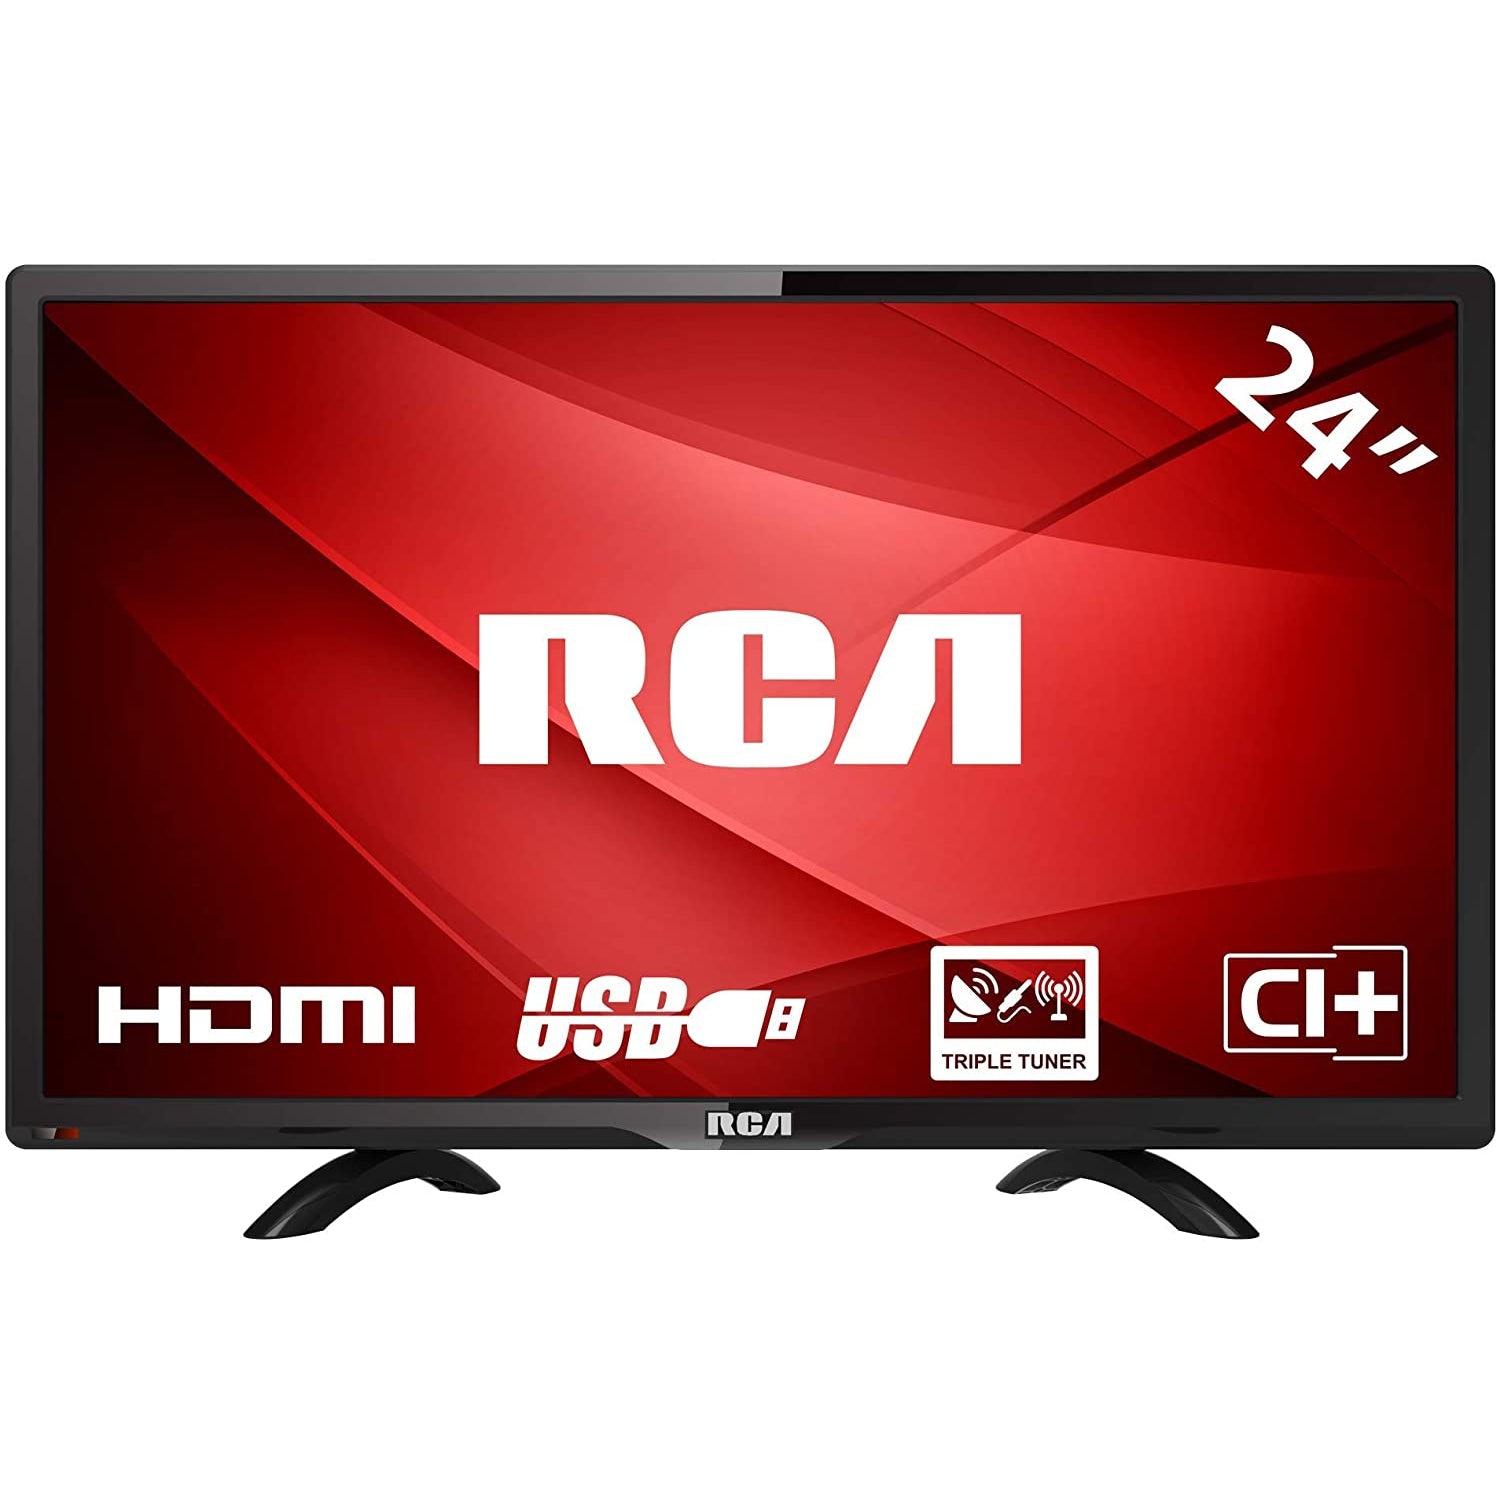 RCA RB24H1-UK 24 inch HD LED TV with HDMI and USB Connection